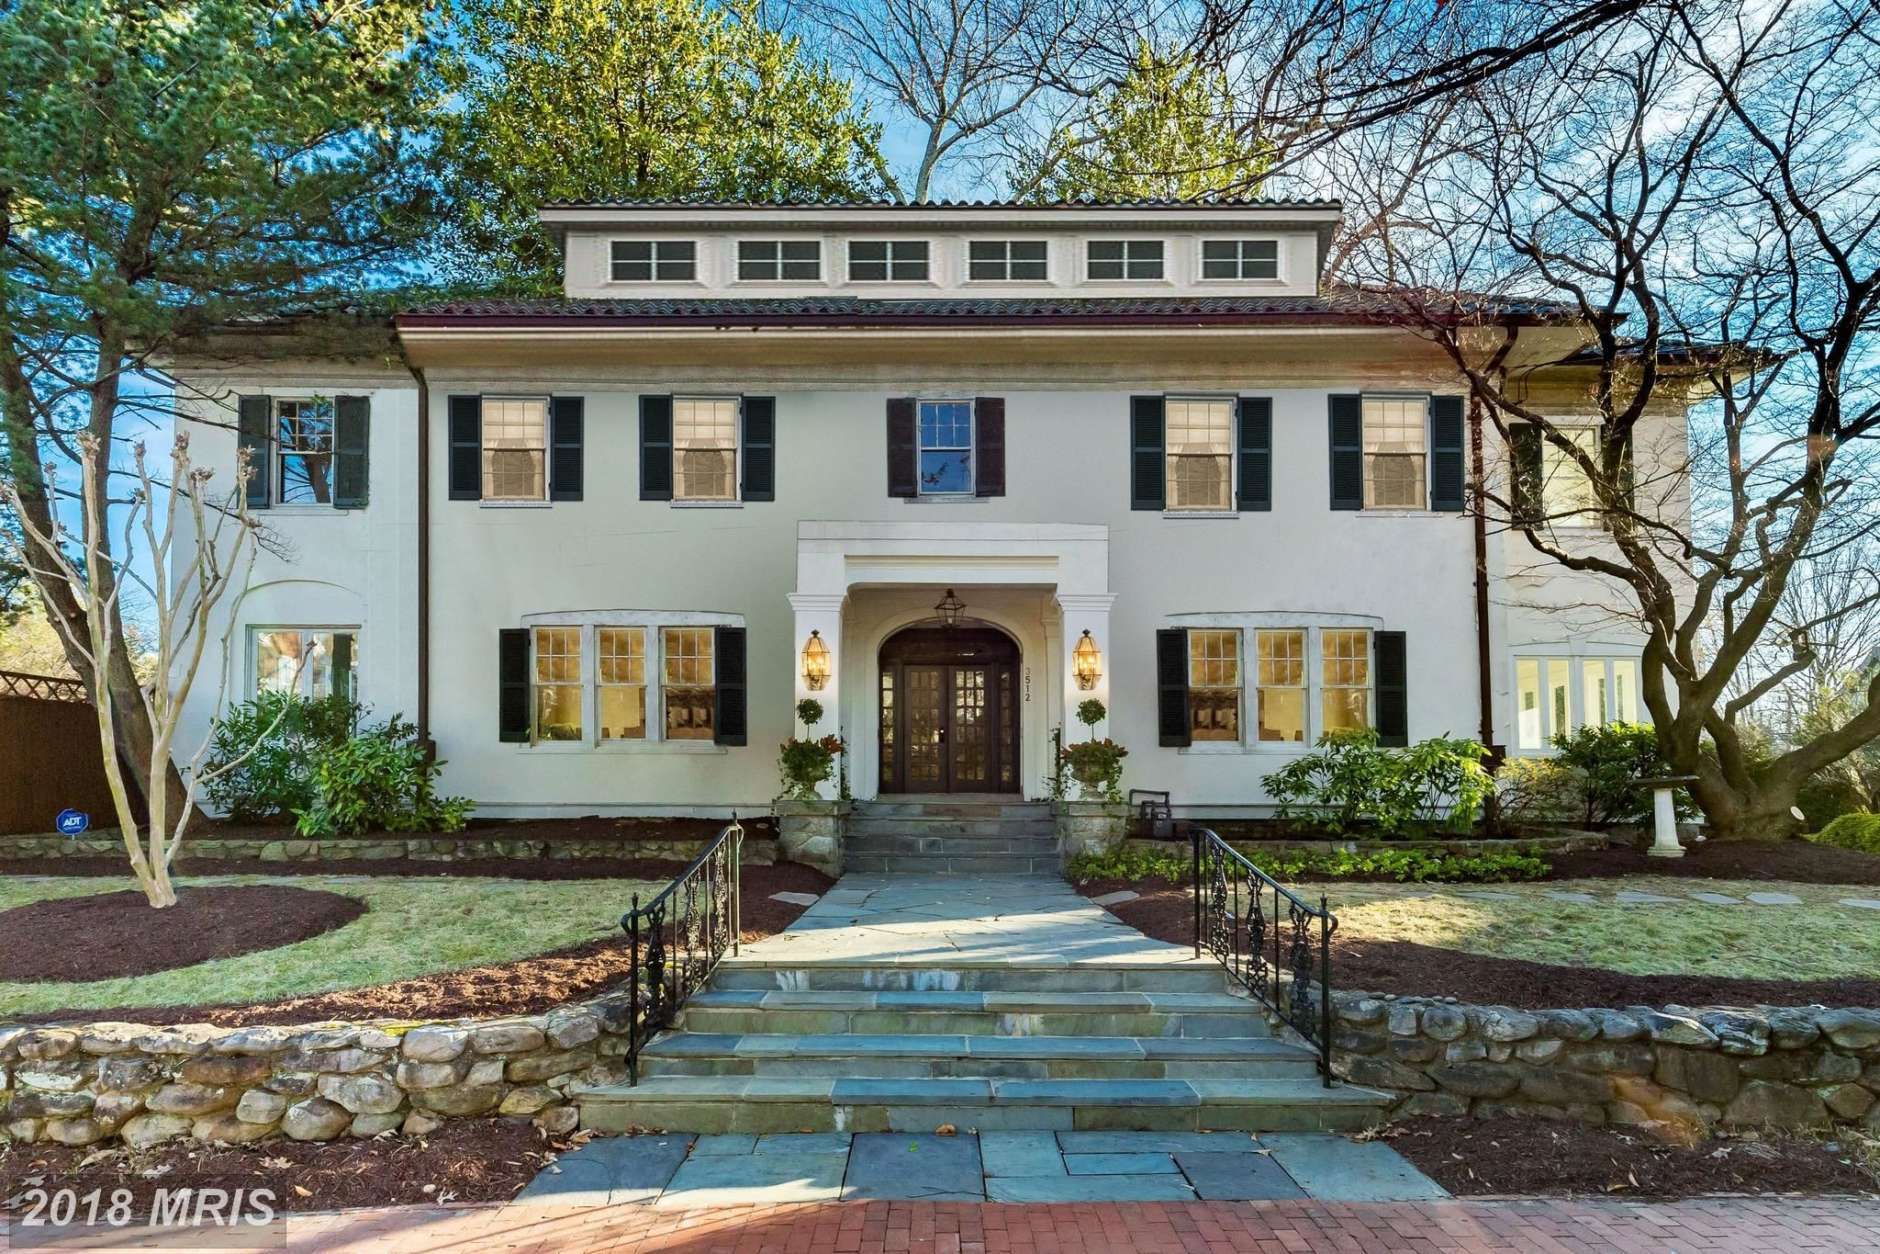 3. $4.2 million 
3512 Lowell St. NW 
Washington, D.C. 

This villa-style home was built in 1917 and has seven full baths, one half-bath and six bedrooms. (Courtesy Bright MLS)